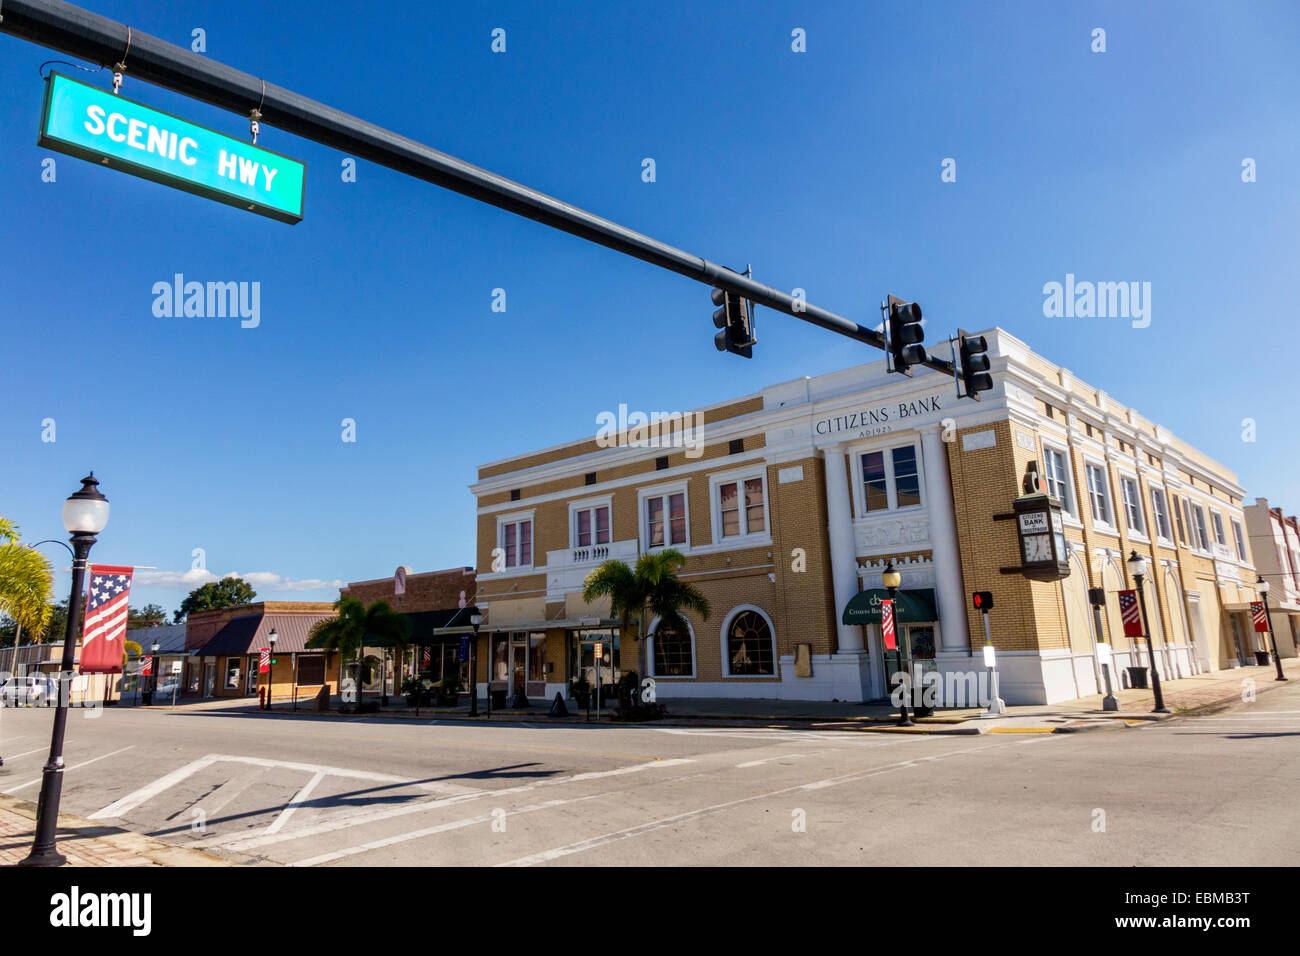 Florida Frostproof,historic downtown,Citizen's Bank,building,wide street,sign,logo,Scenic Hwy Highway,visitors travel traveling tour tourist tourism l Stock Photo